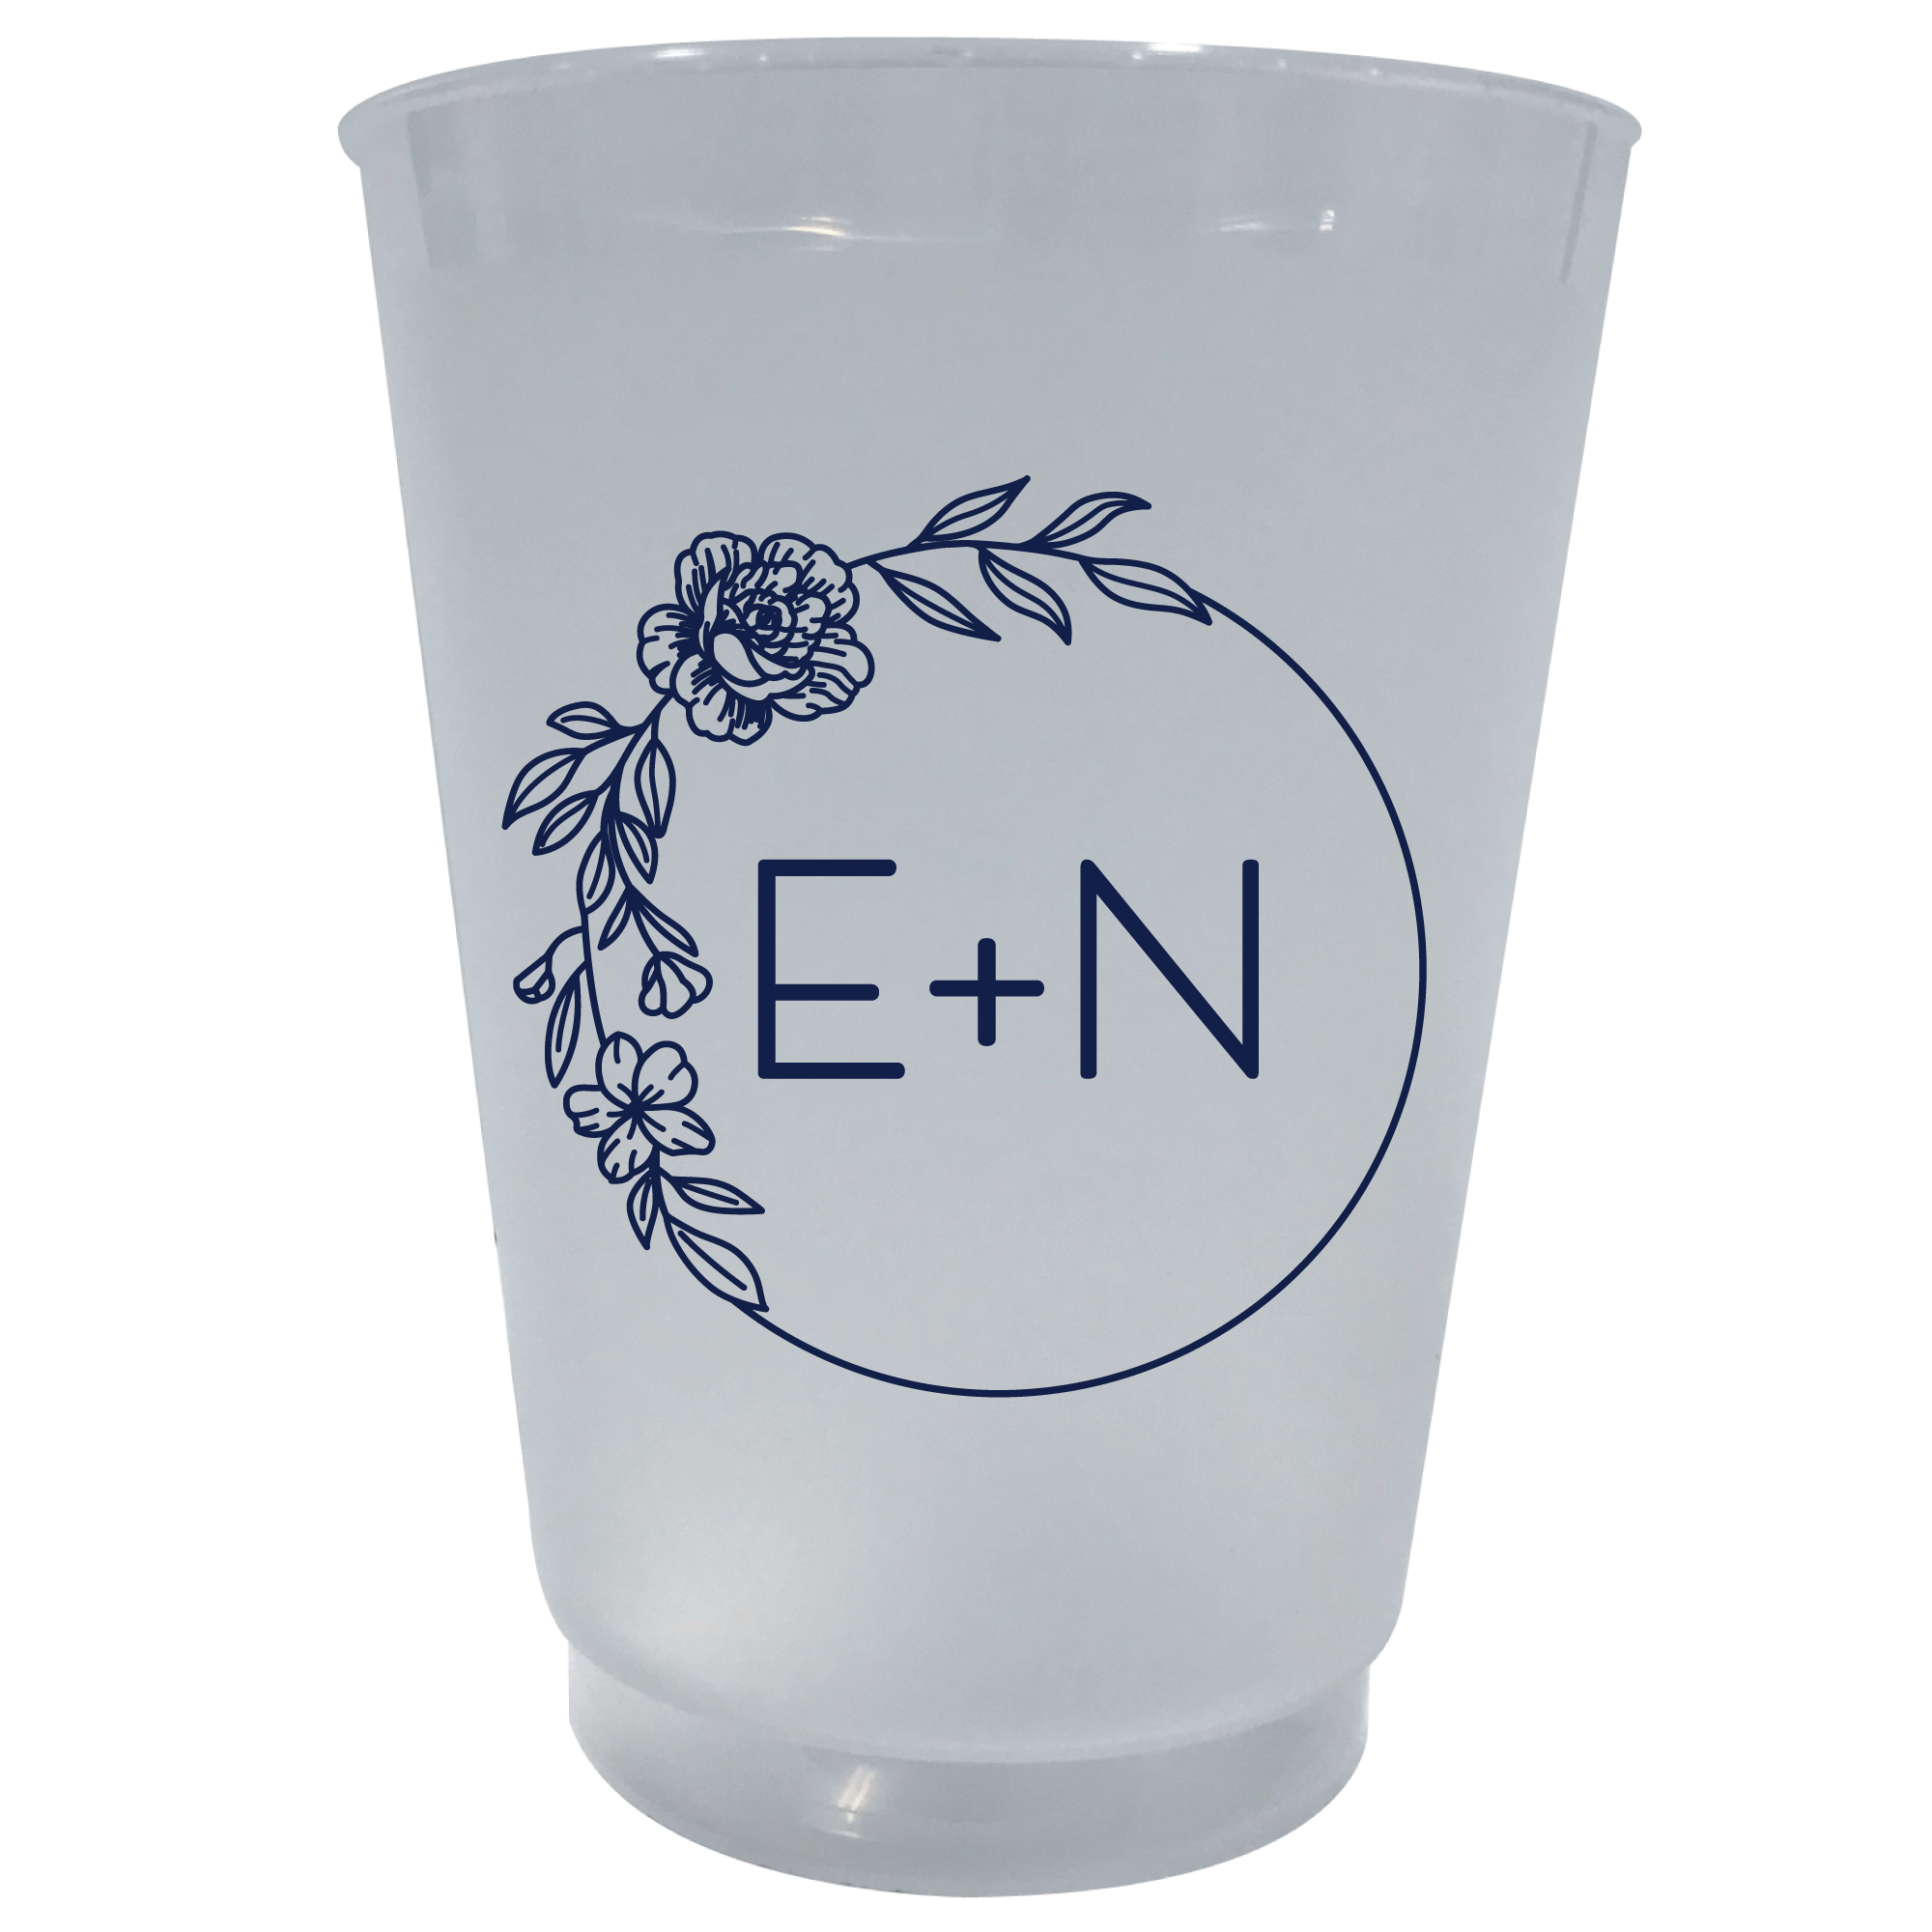 Custom Printed / Personalized Frosted Plastic Cups at Balloons Tomorrow